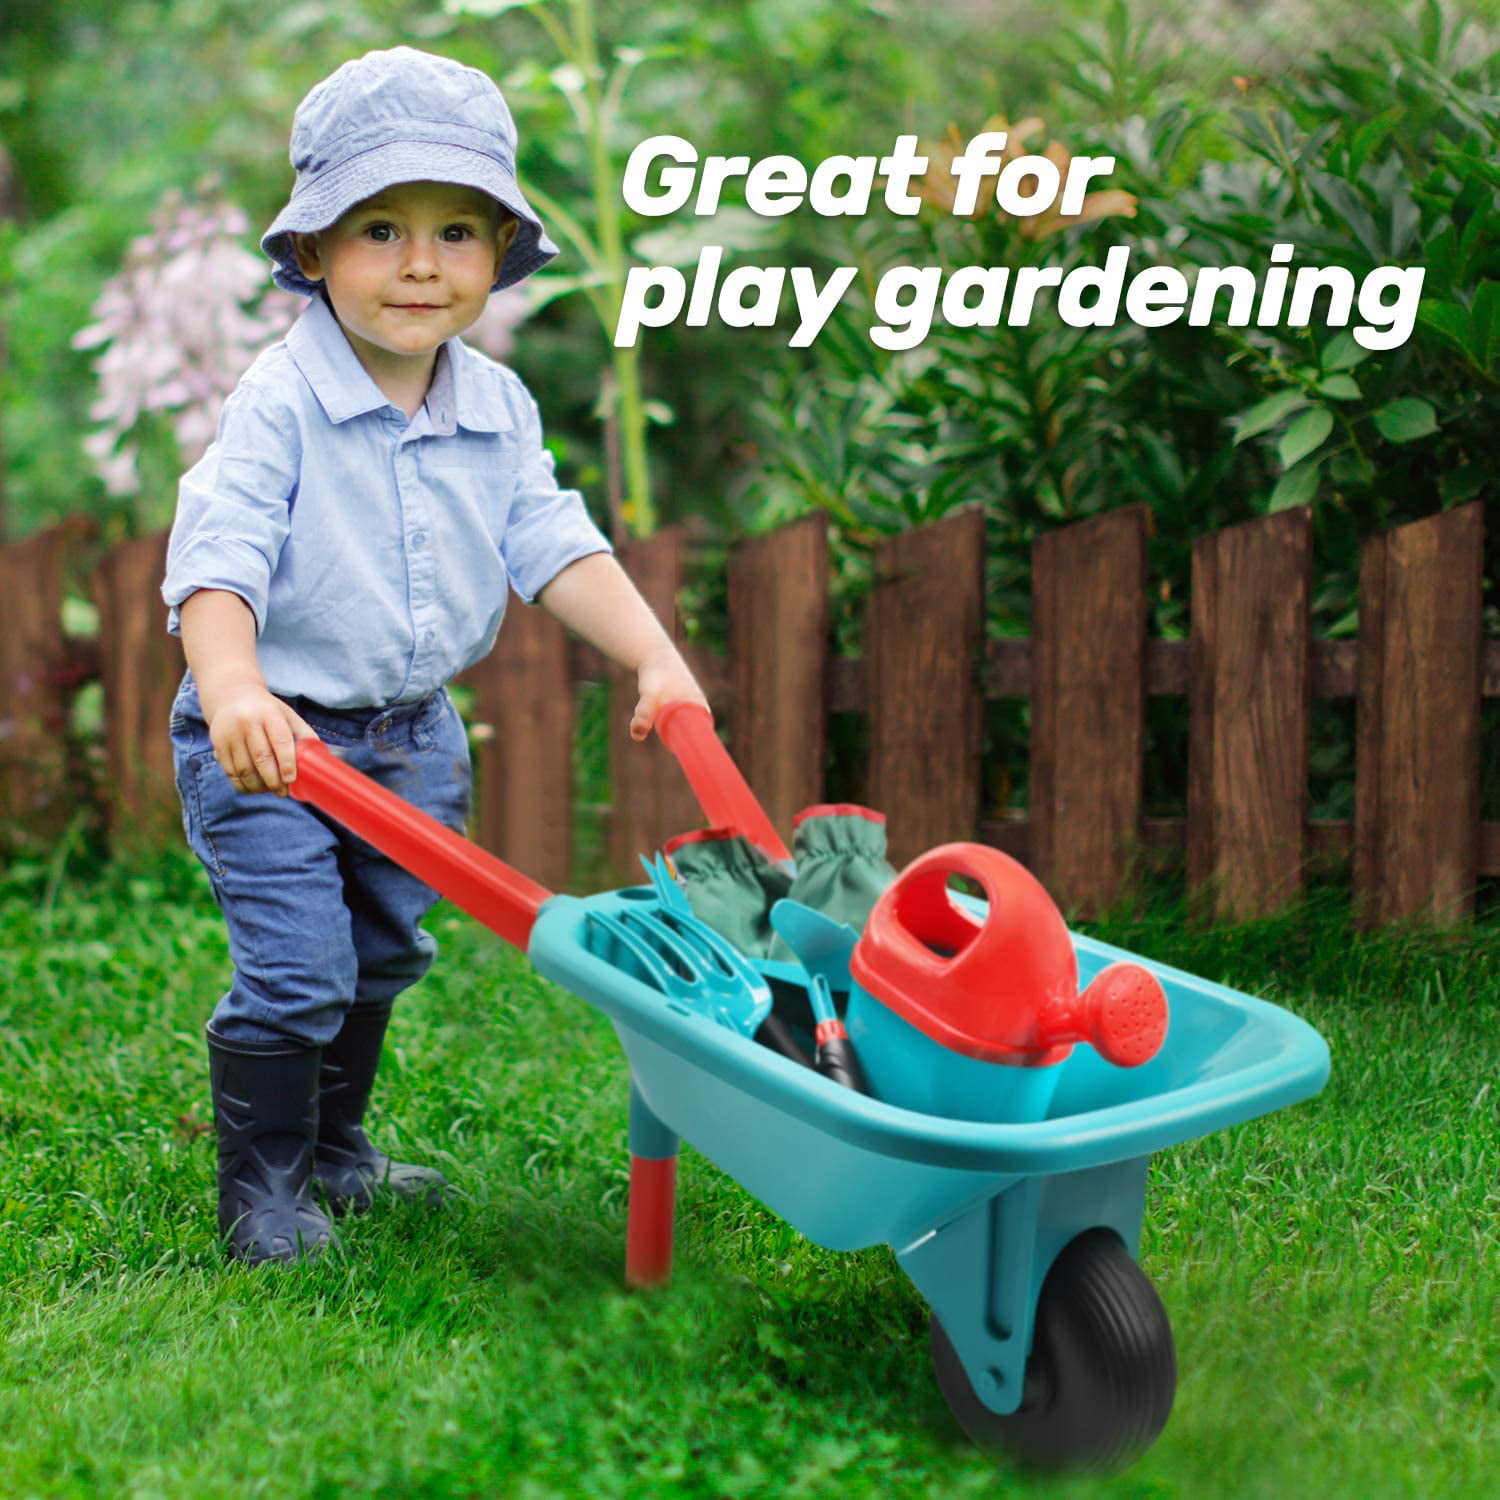 Watering Cans Hoe and Trowel Pretend Cleaning Gardening Trolley Rake Shovel Blue Garden Play Set shamoluotuo Potted Plants and Tool Trolley Kids Gardening Set with Flower Pots